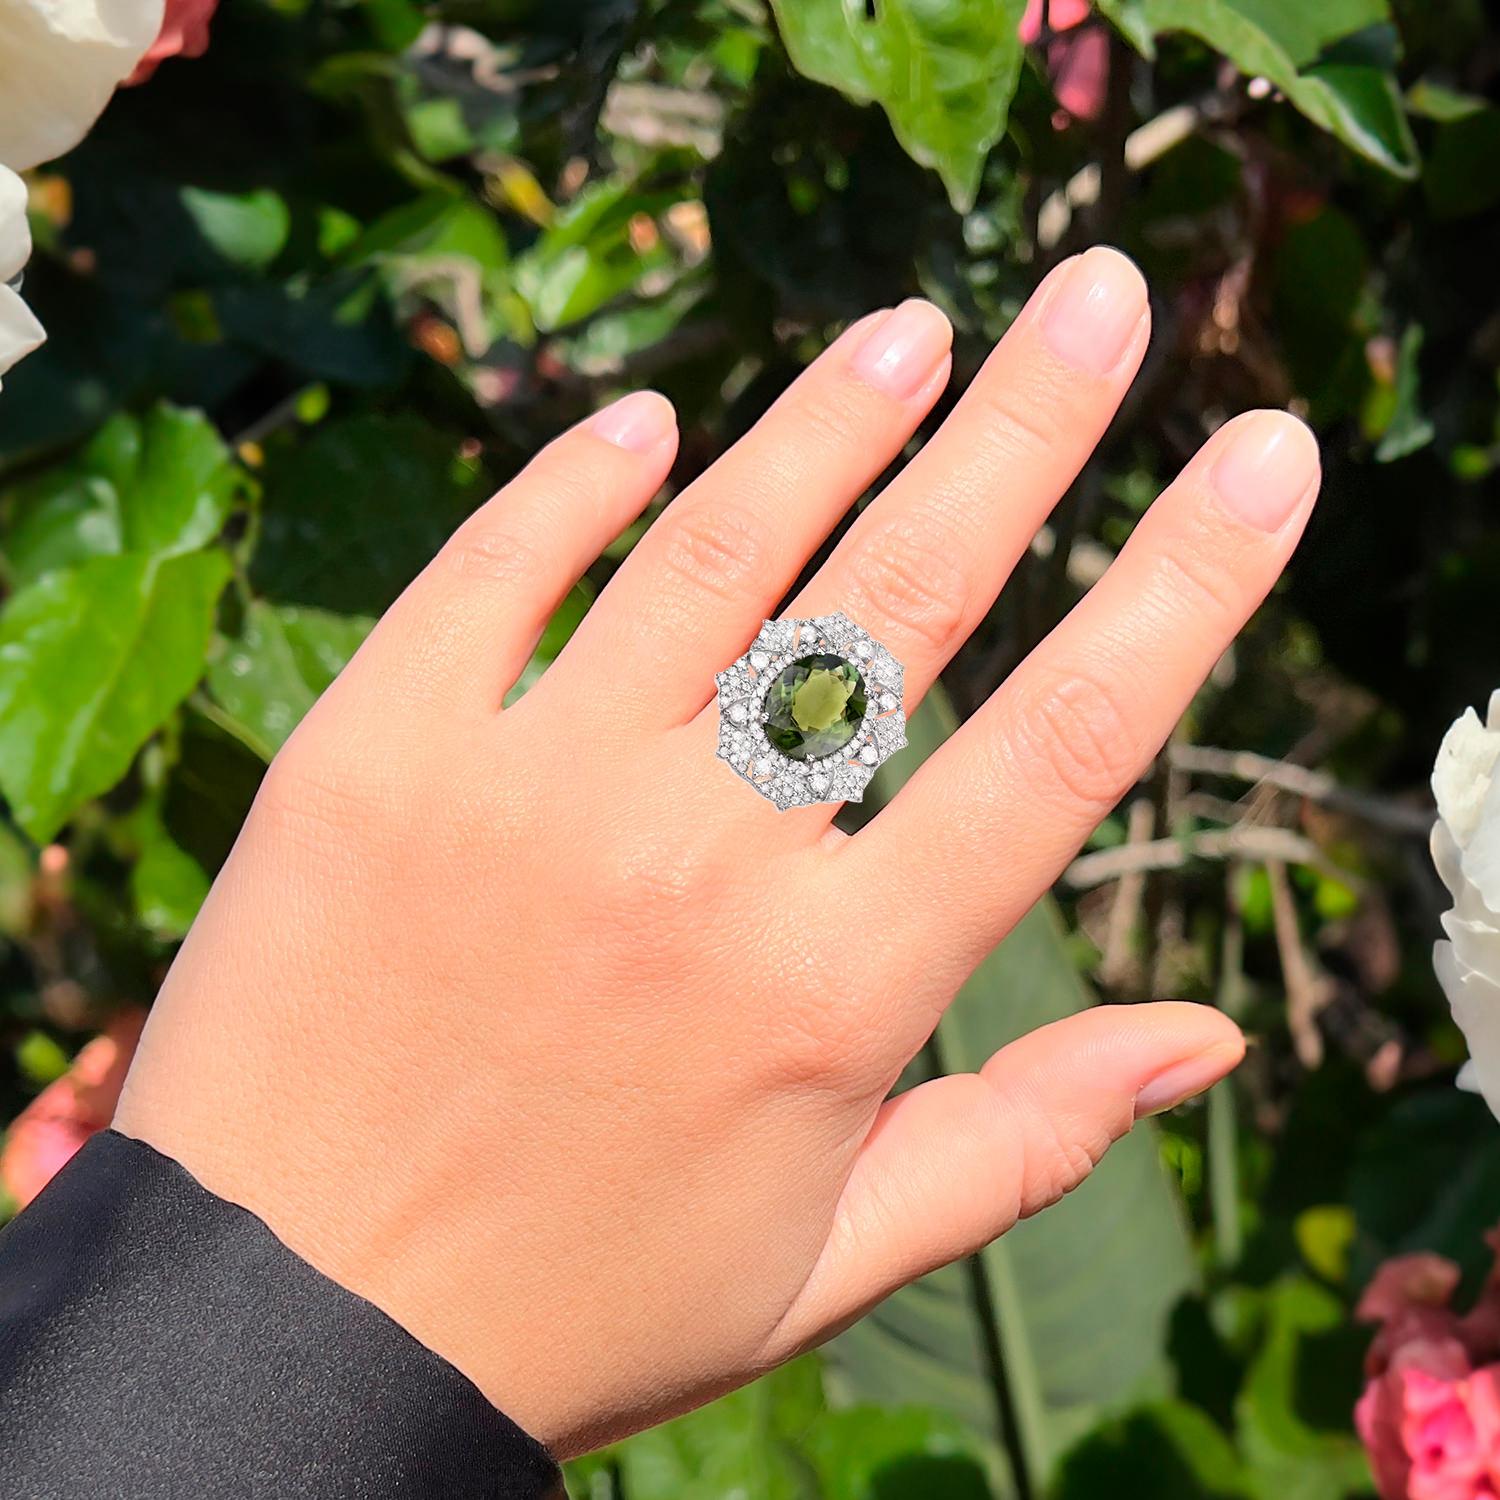 Mixed Cut Green Tourmaline Cocktail Ring Diamond Setting 7.65 Carats For Sale